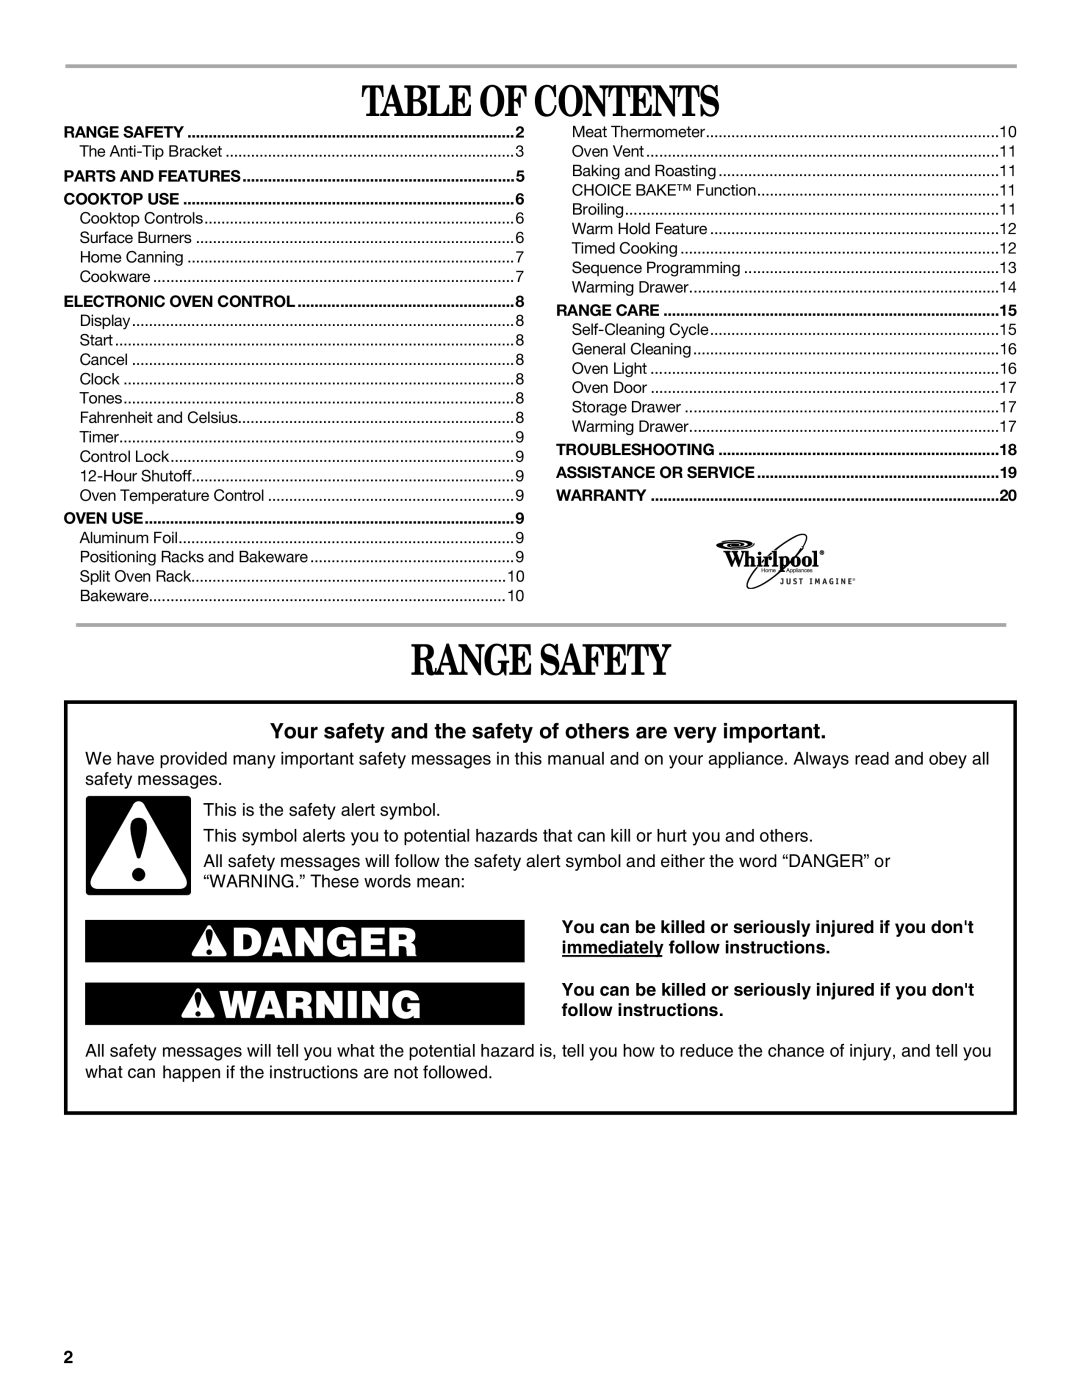 Whirlpool GS458LEL, GS465LEL manual Table Of Contents, Range Safety, Your safety and the safety of others are very important 